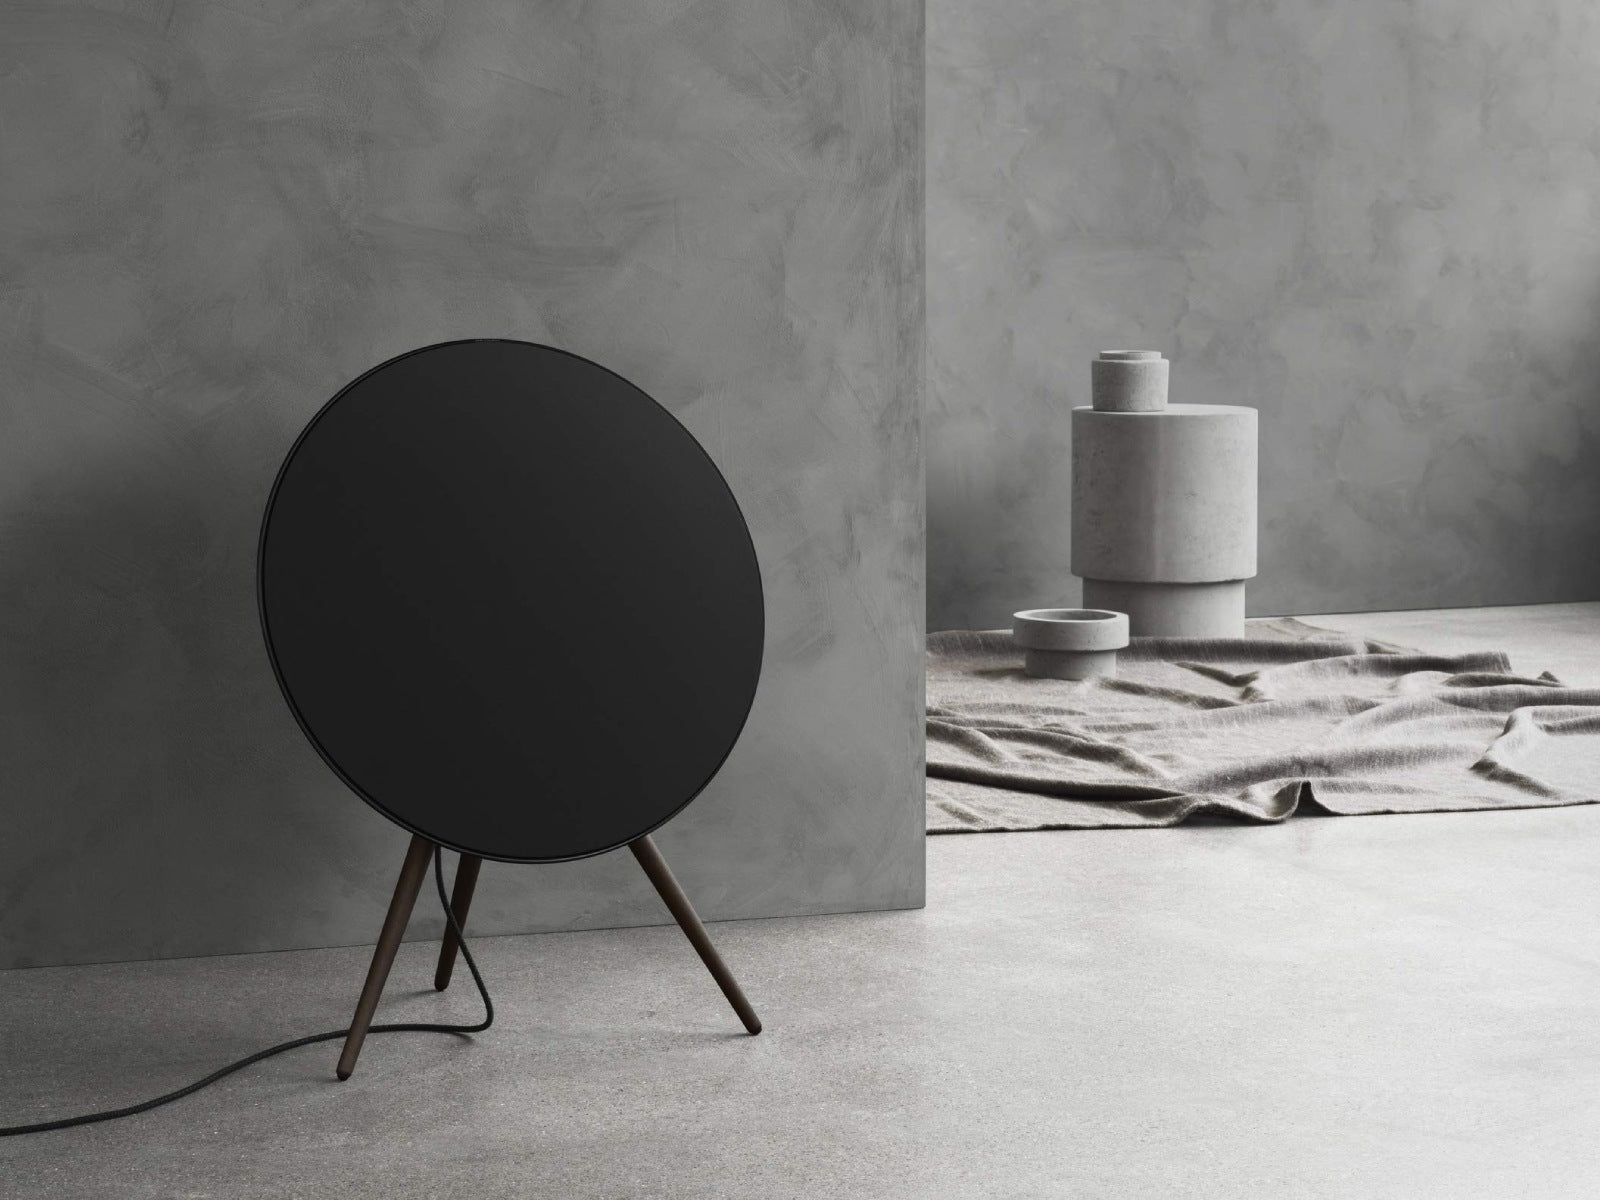 Parlante WIFI Beoplay A9 Black Anthracite B&O